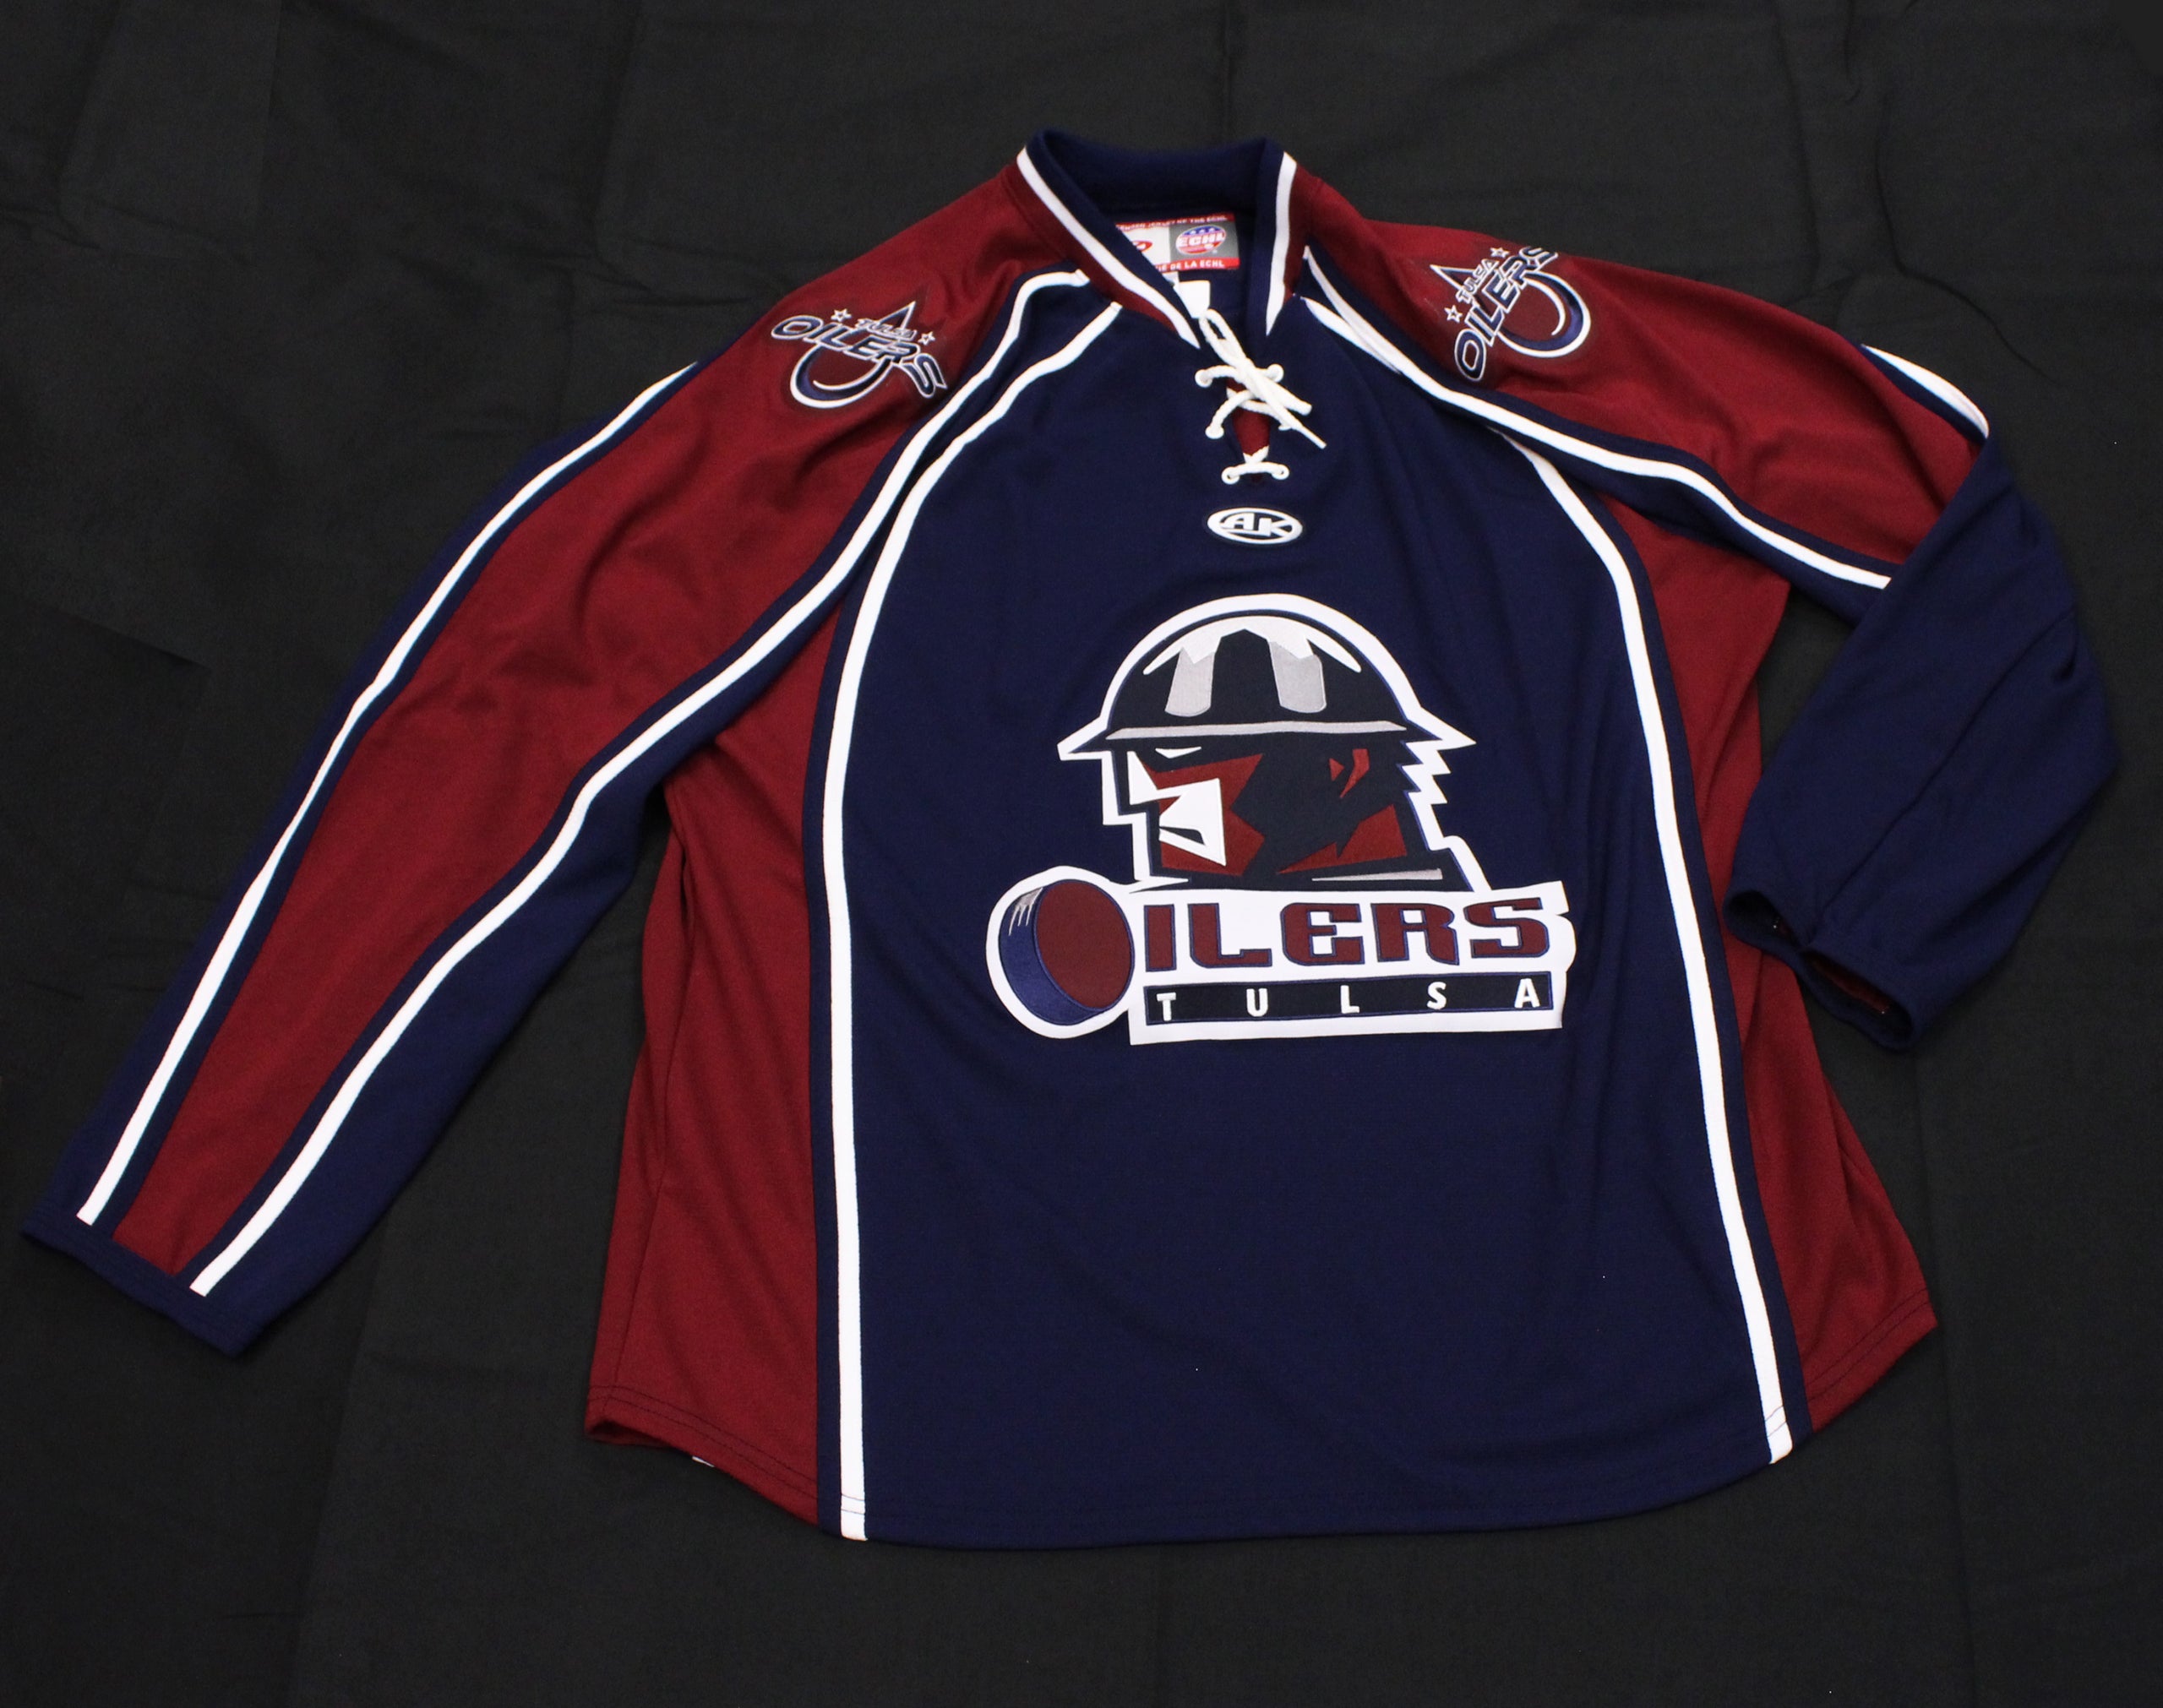 Tulsa Oilers on X: Our Native American Heritage Jerseys are ready to hit  the ice! Tonight's jerseys will be auctioned off in the River Spirit Lounge  directly after the game! #DefendtheRig #ECHL